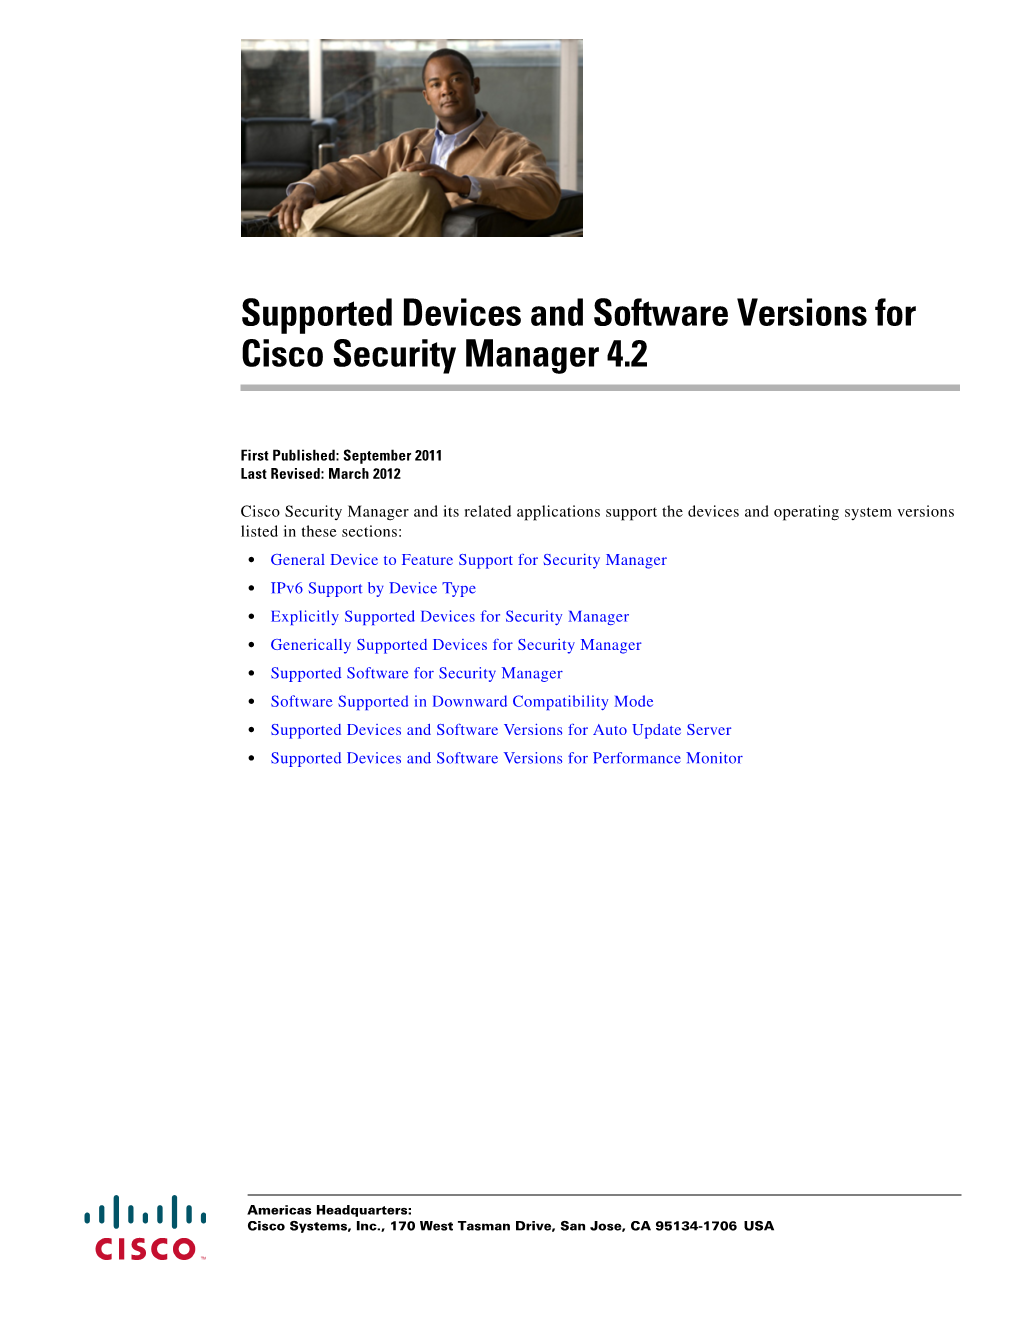 Supported Devices and Software Versions for Cisco Security Manager 4.2